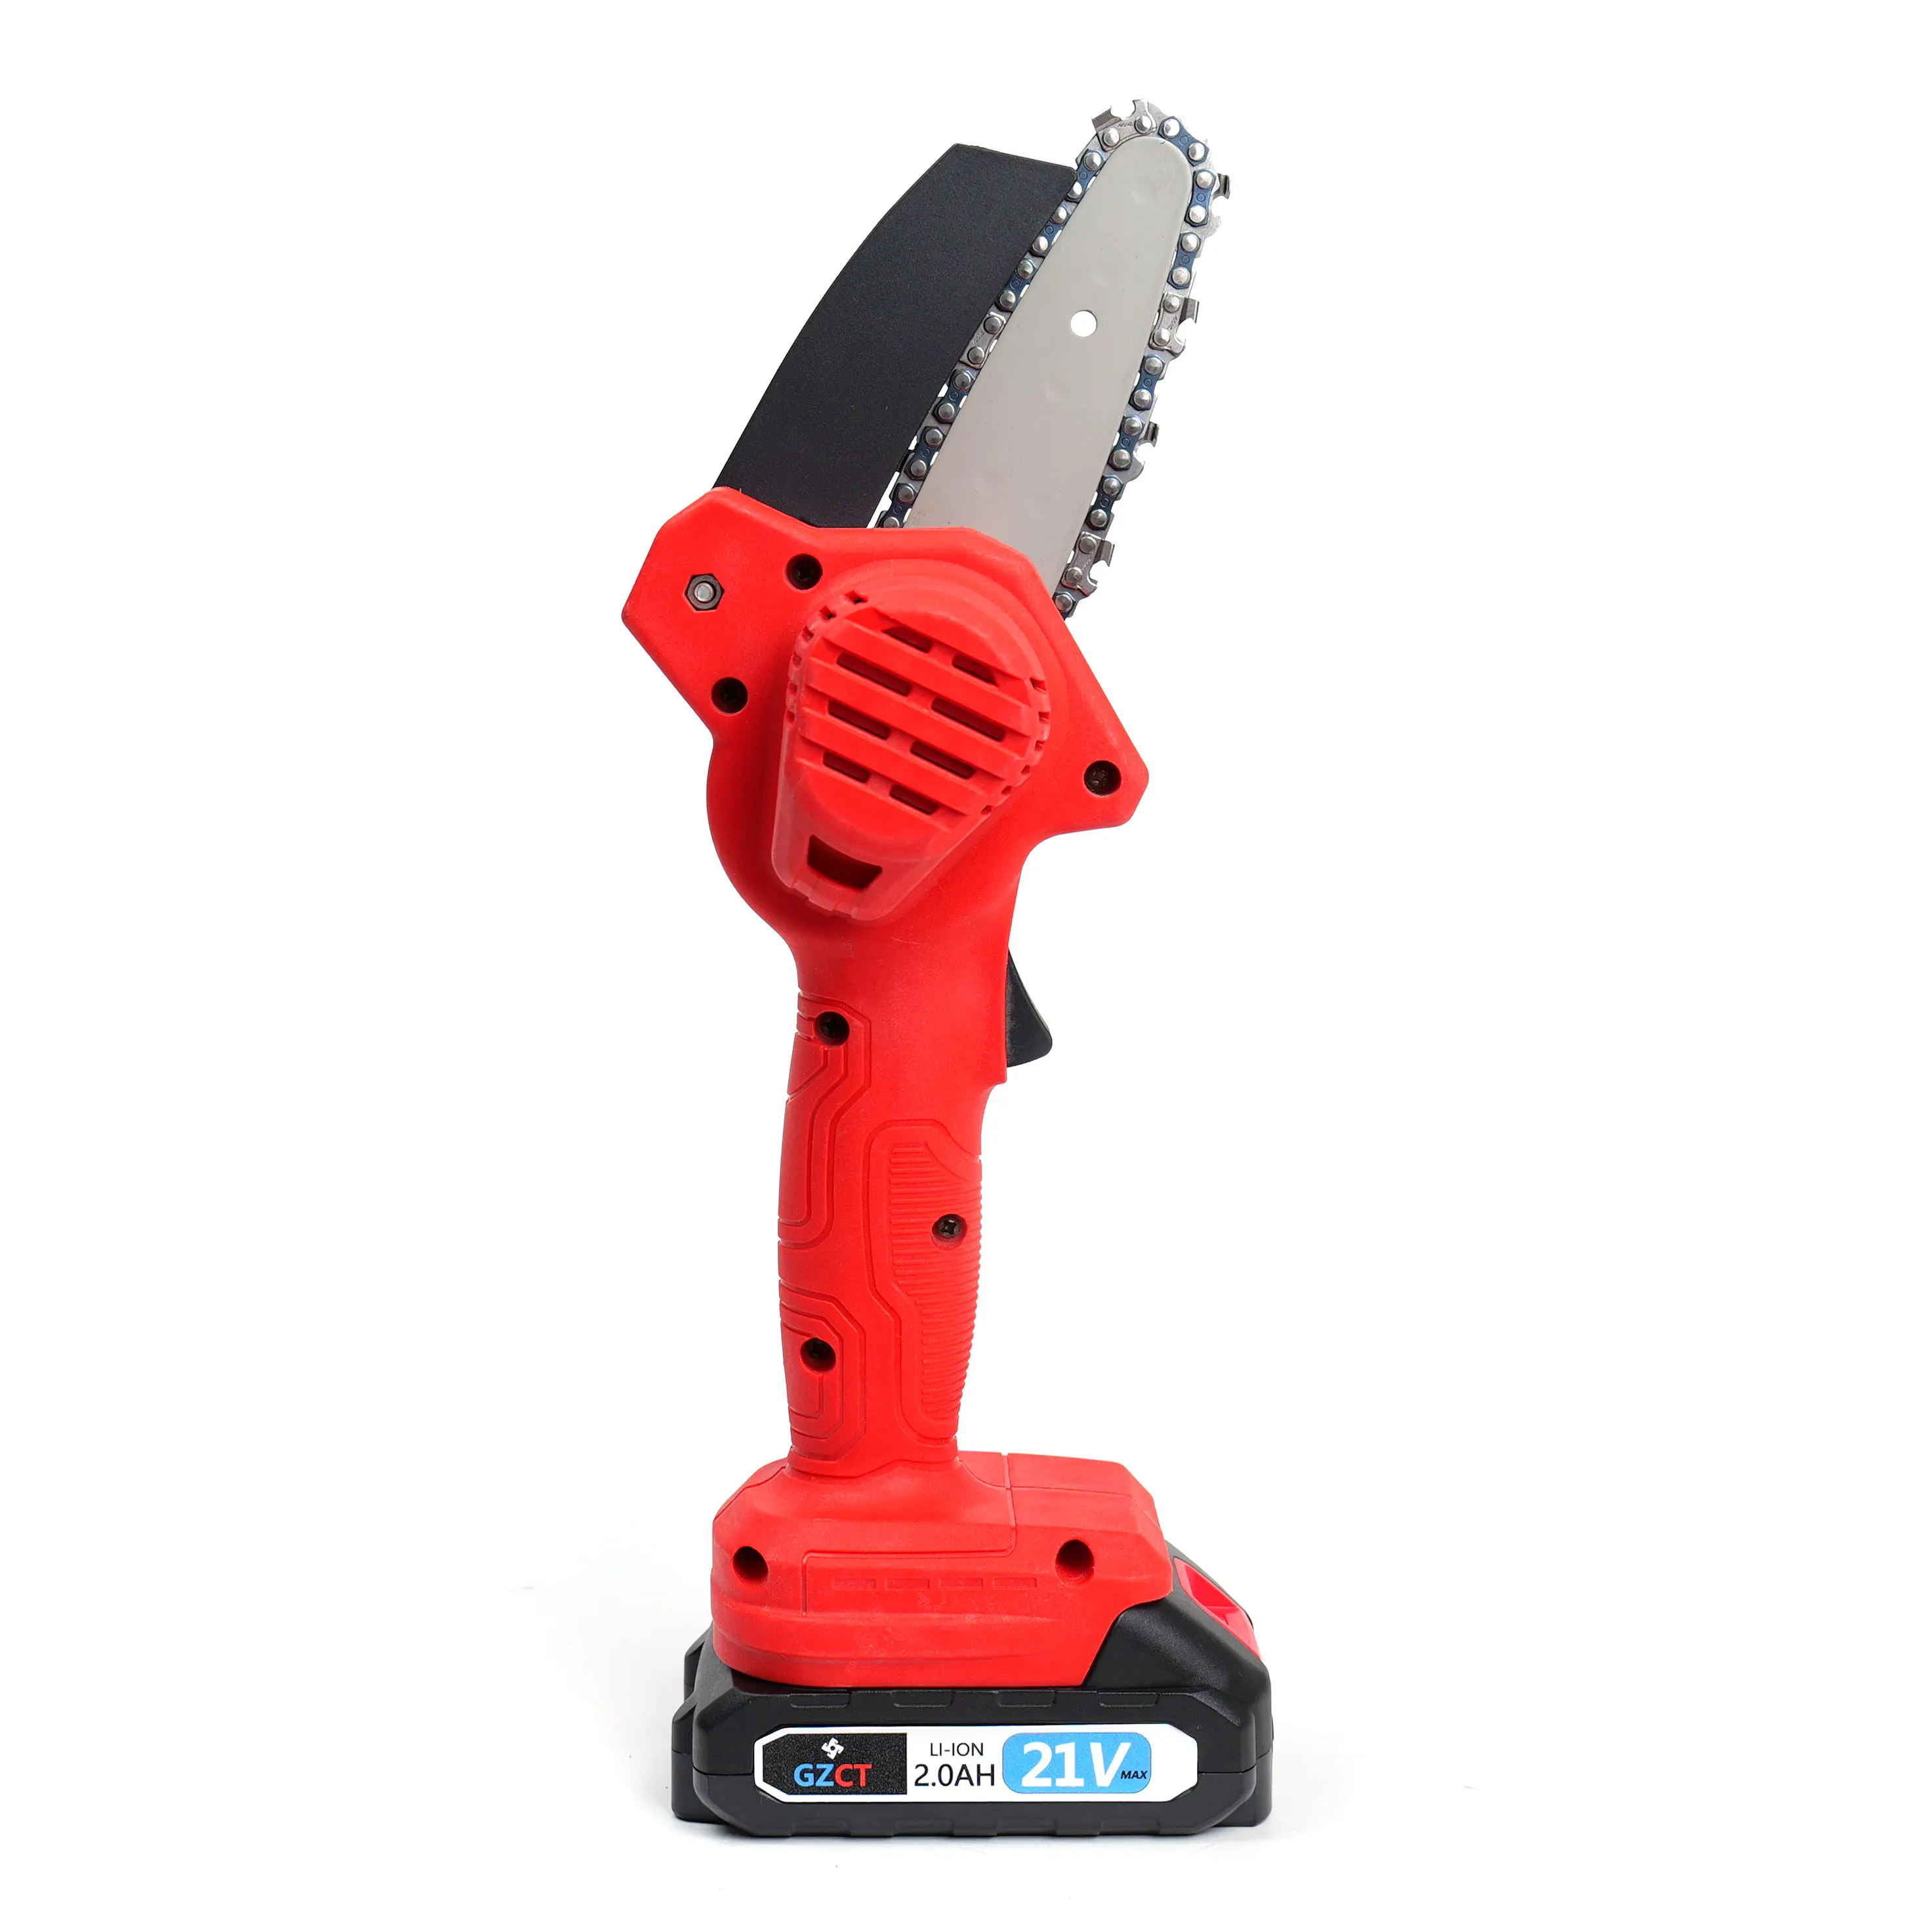 GZCT 9621 OEM Portable 4 inch Electric Chainsaw Cordless Mini Battery With Brush Motor 21V Battery Chainsaw